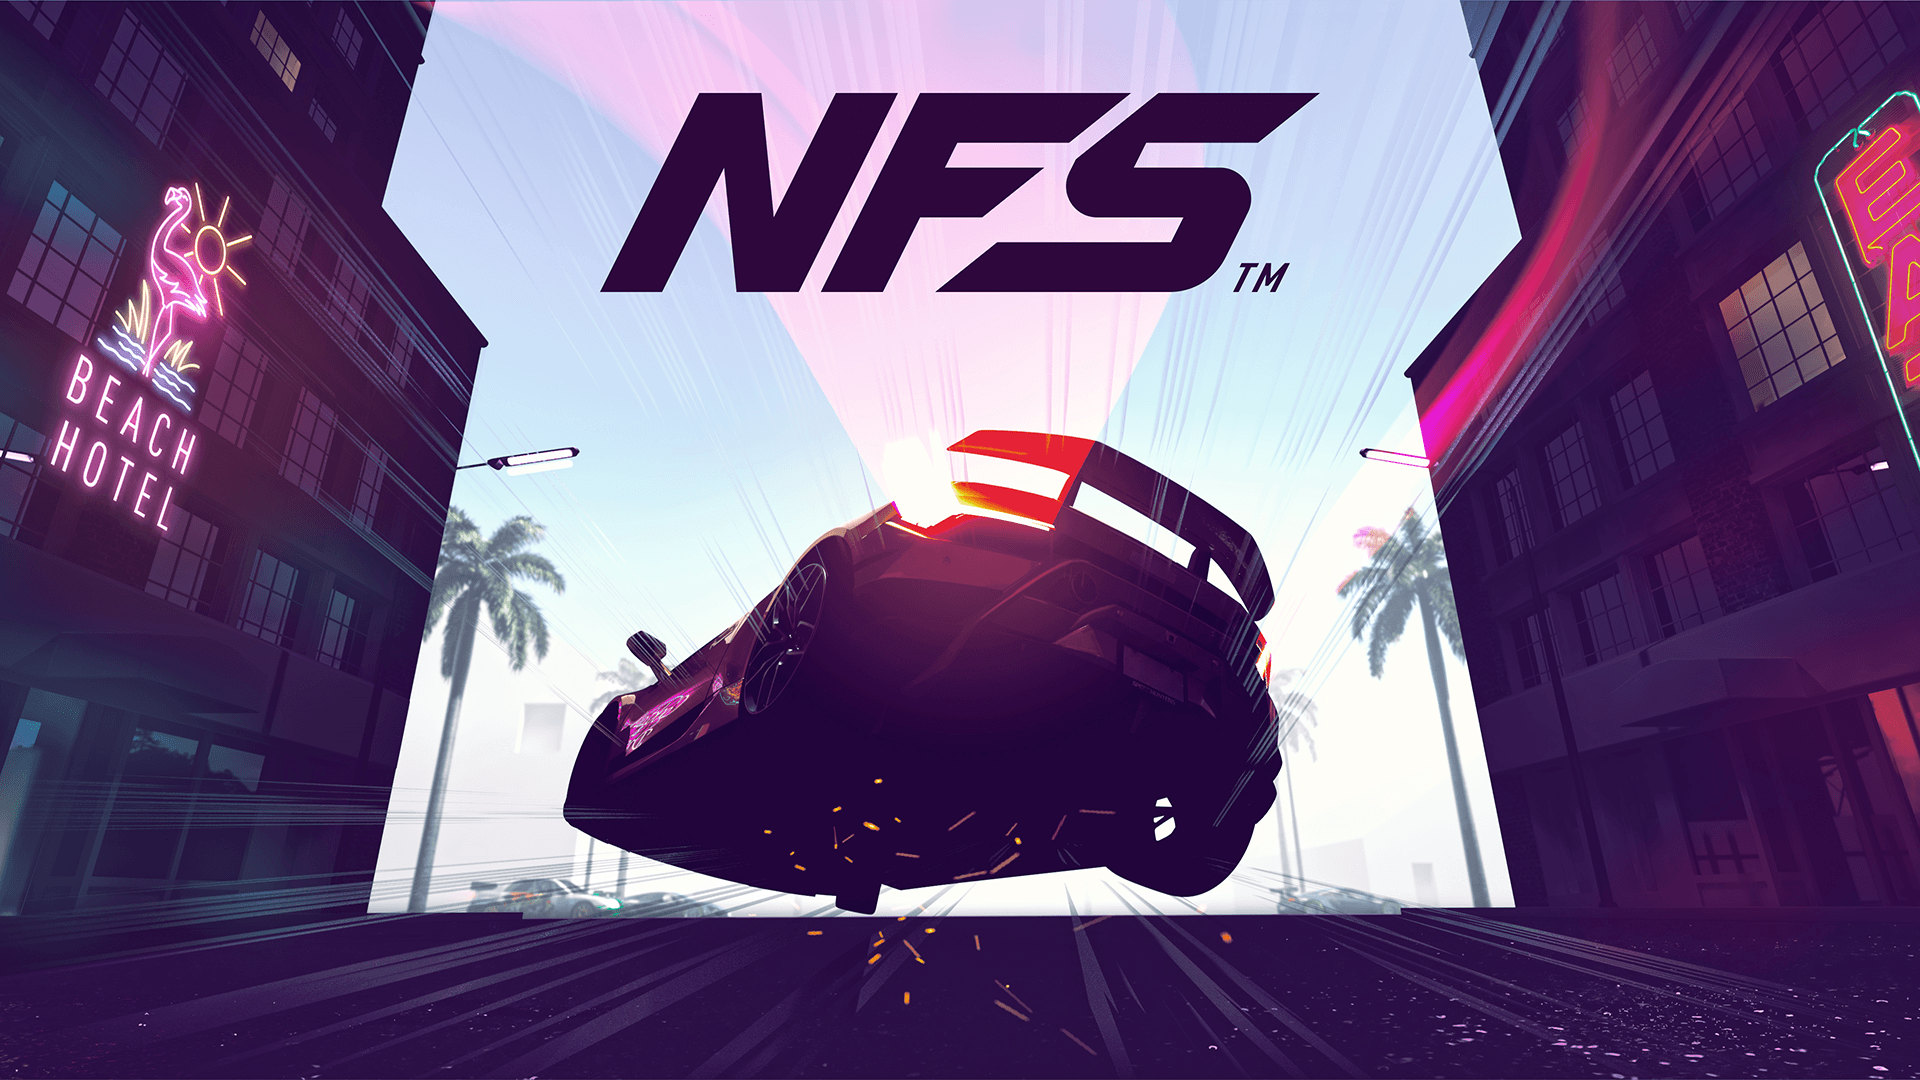 An Official Need for Speed Heat wallpaper (1920x1080)